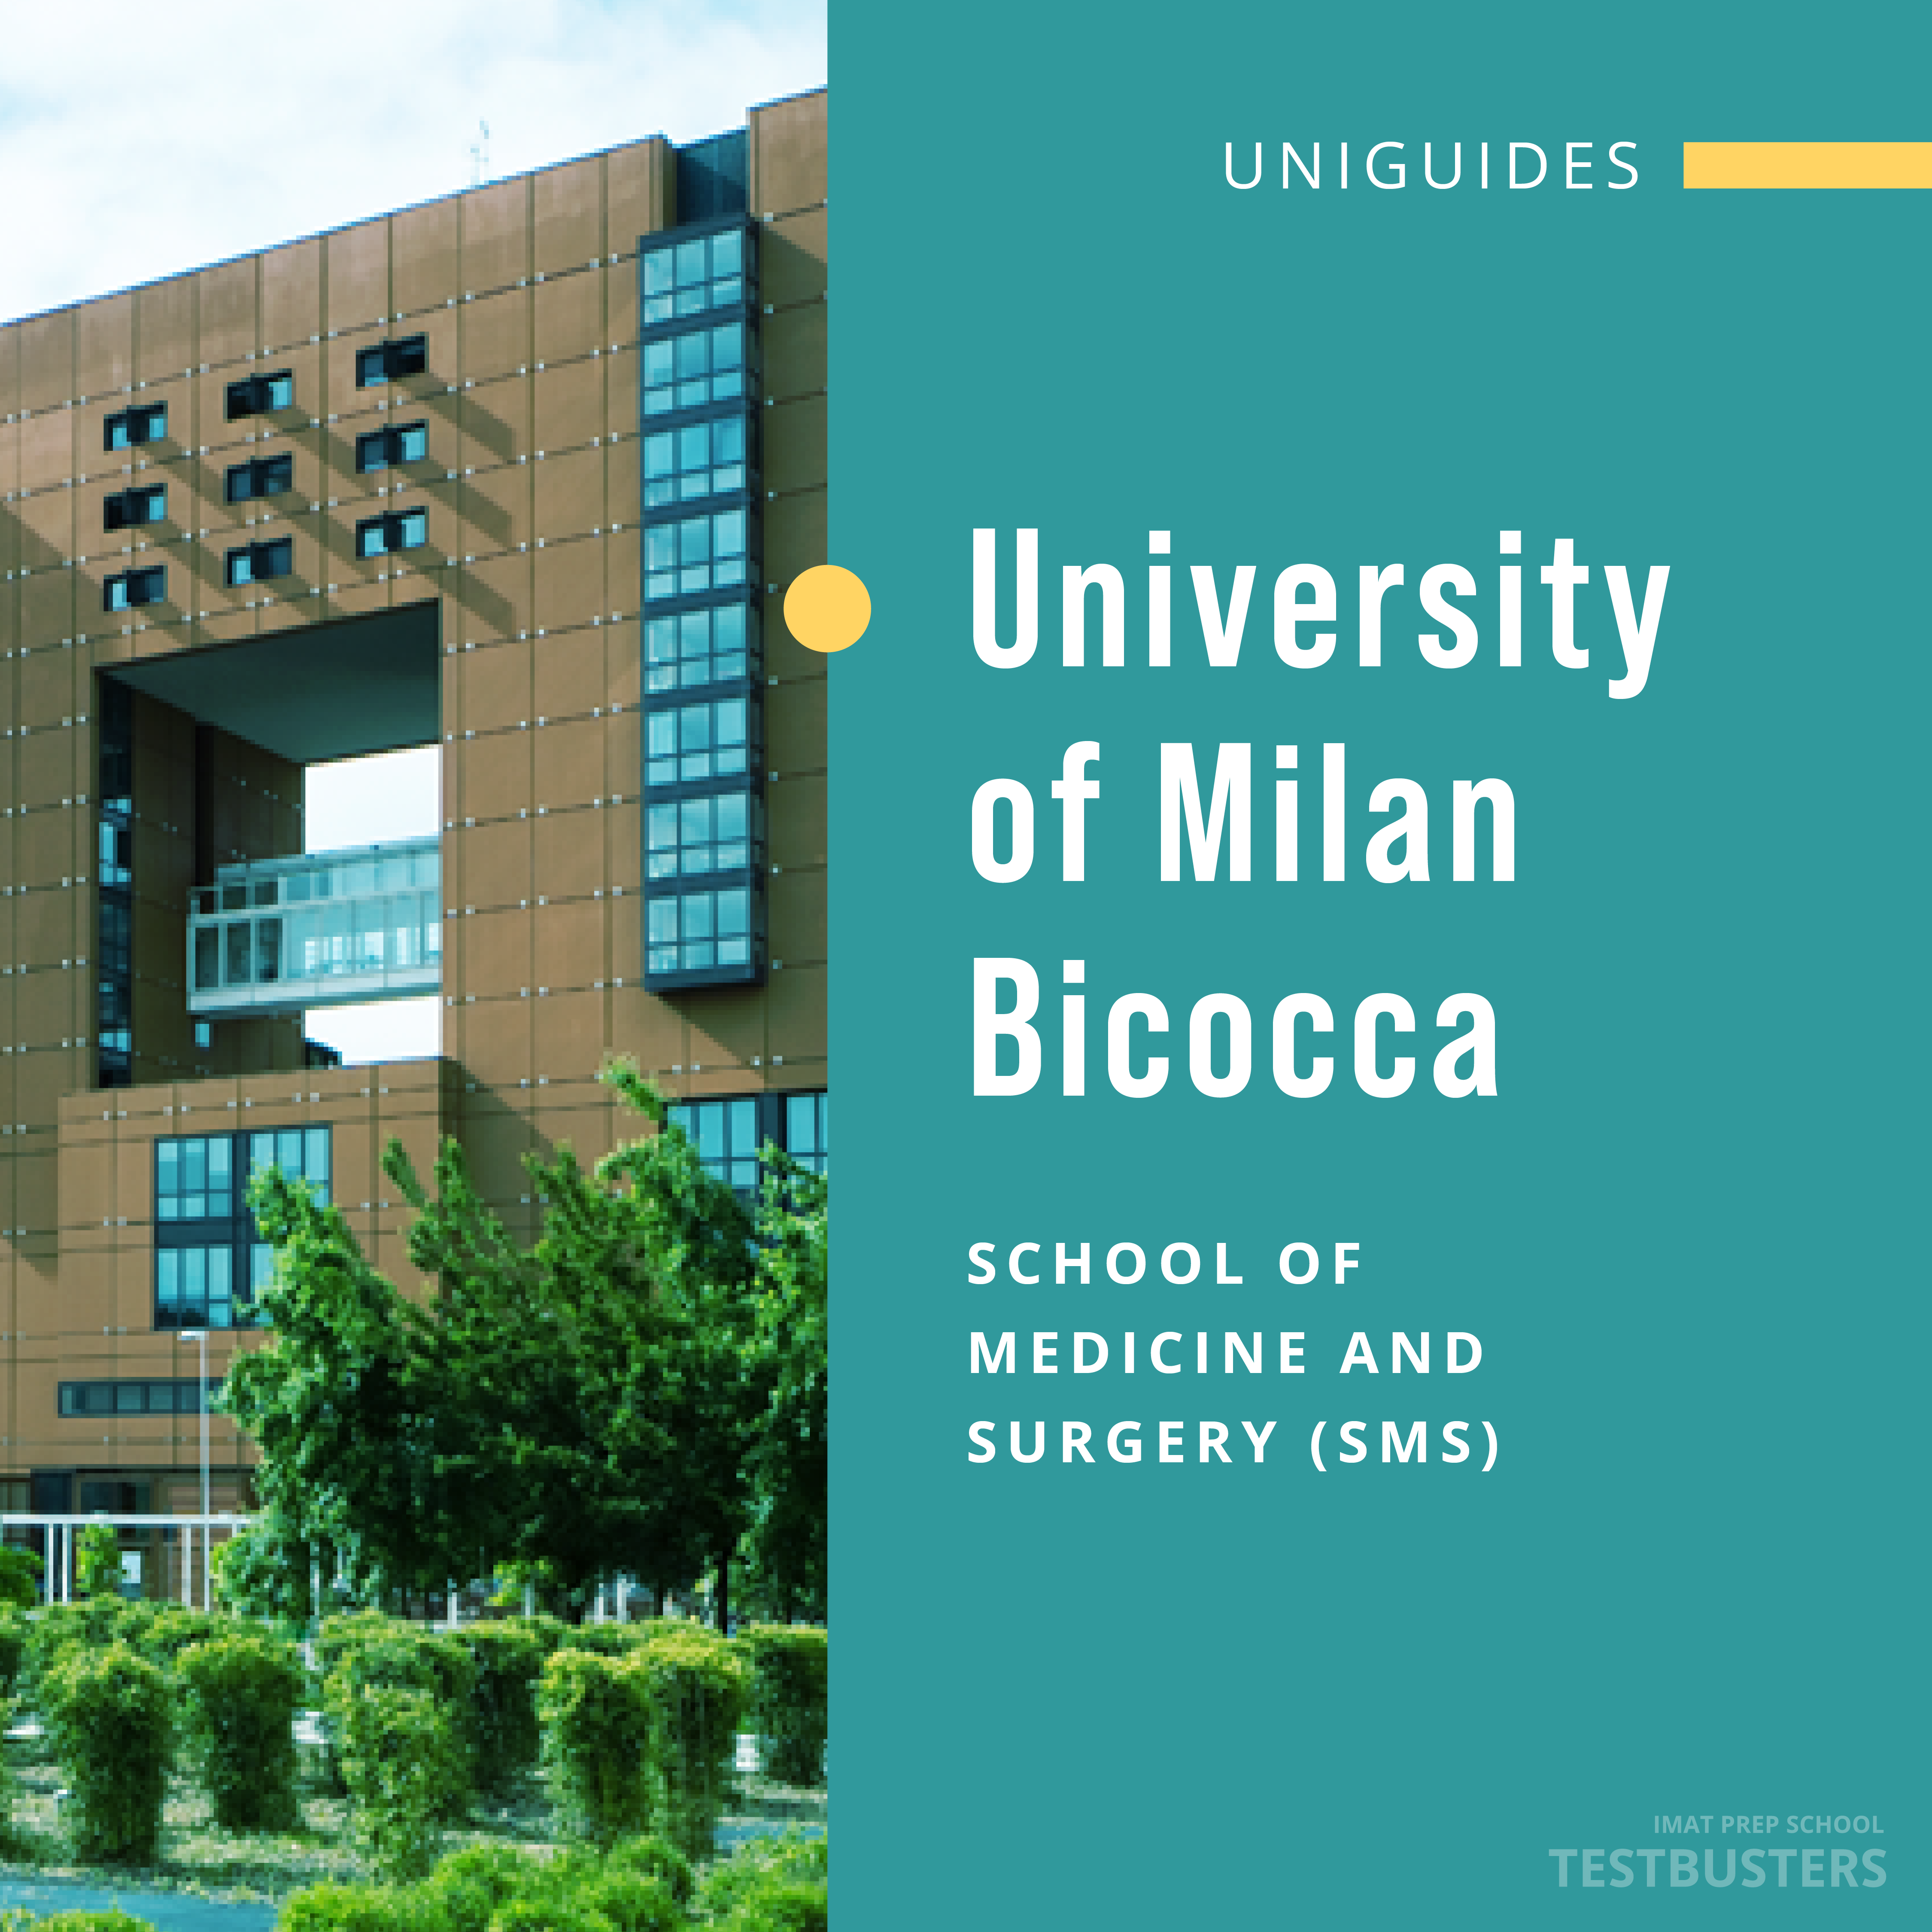 The University of Milan Bicocca School of Medicine and Surgery (SMS)